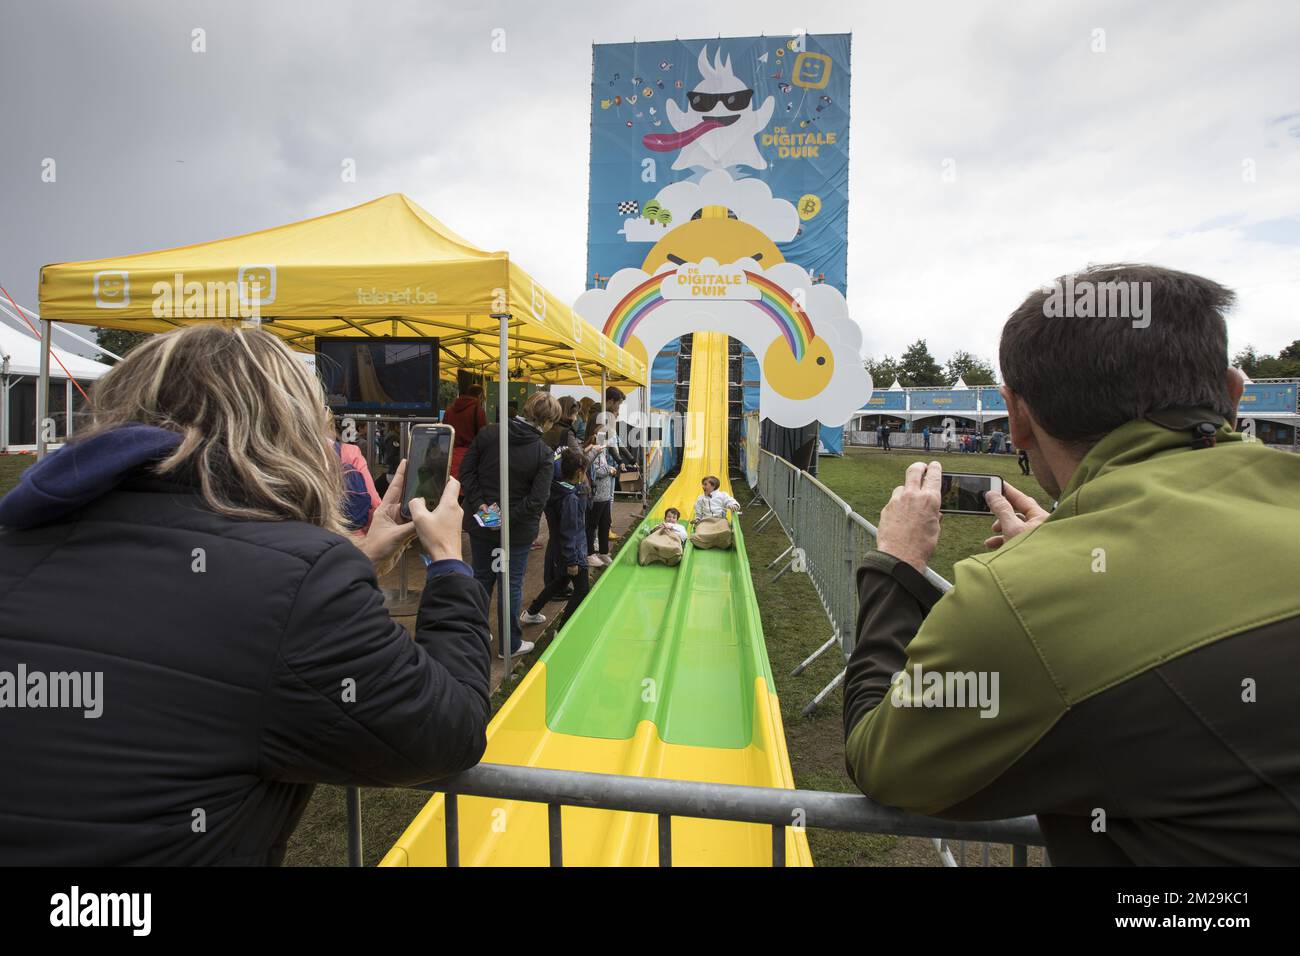 ATTENTION EDITORS - FOCUS COVERAGE REQUESTED TO BELGA - EDITORIAL USE ONLY sfeerbeeld and general ambiance the second day of the 'Digitale Duik' festival organised by Telenet, in Boon, Saturday 16 September 2017. BELGA PHOTO KOEN BLANCKAERT Stock Photo